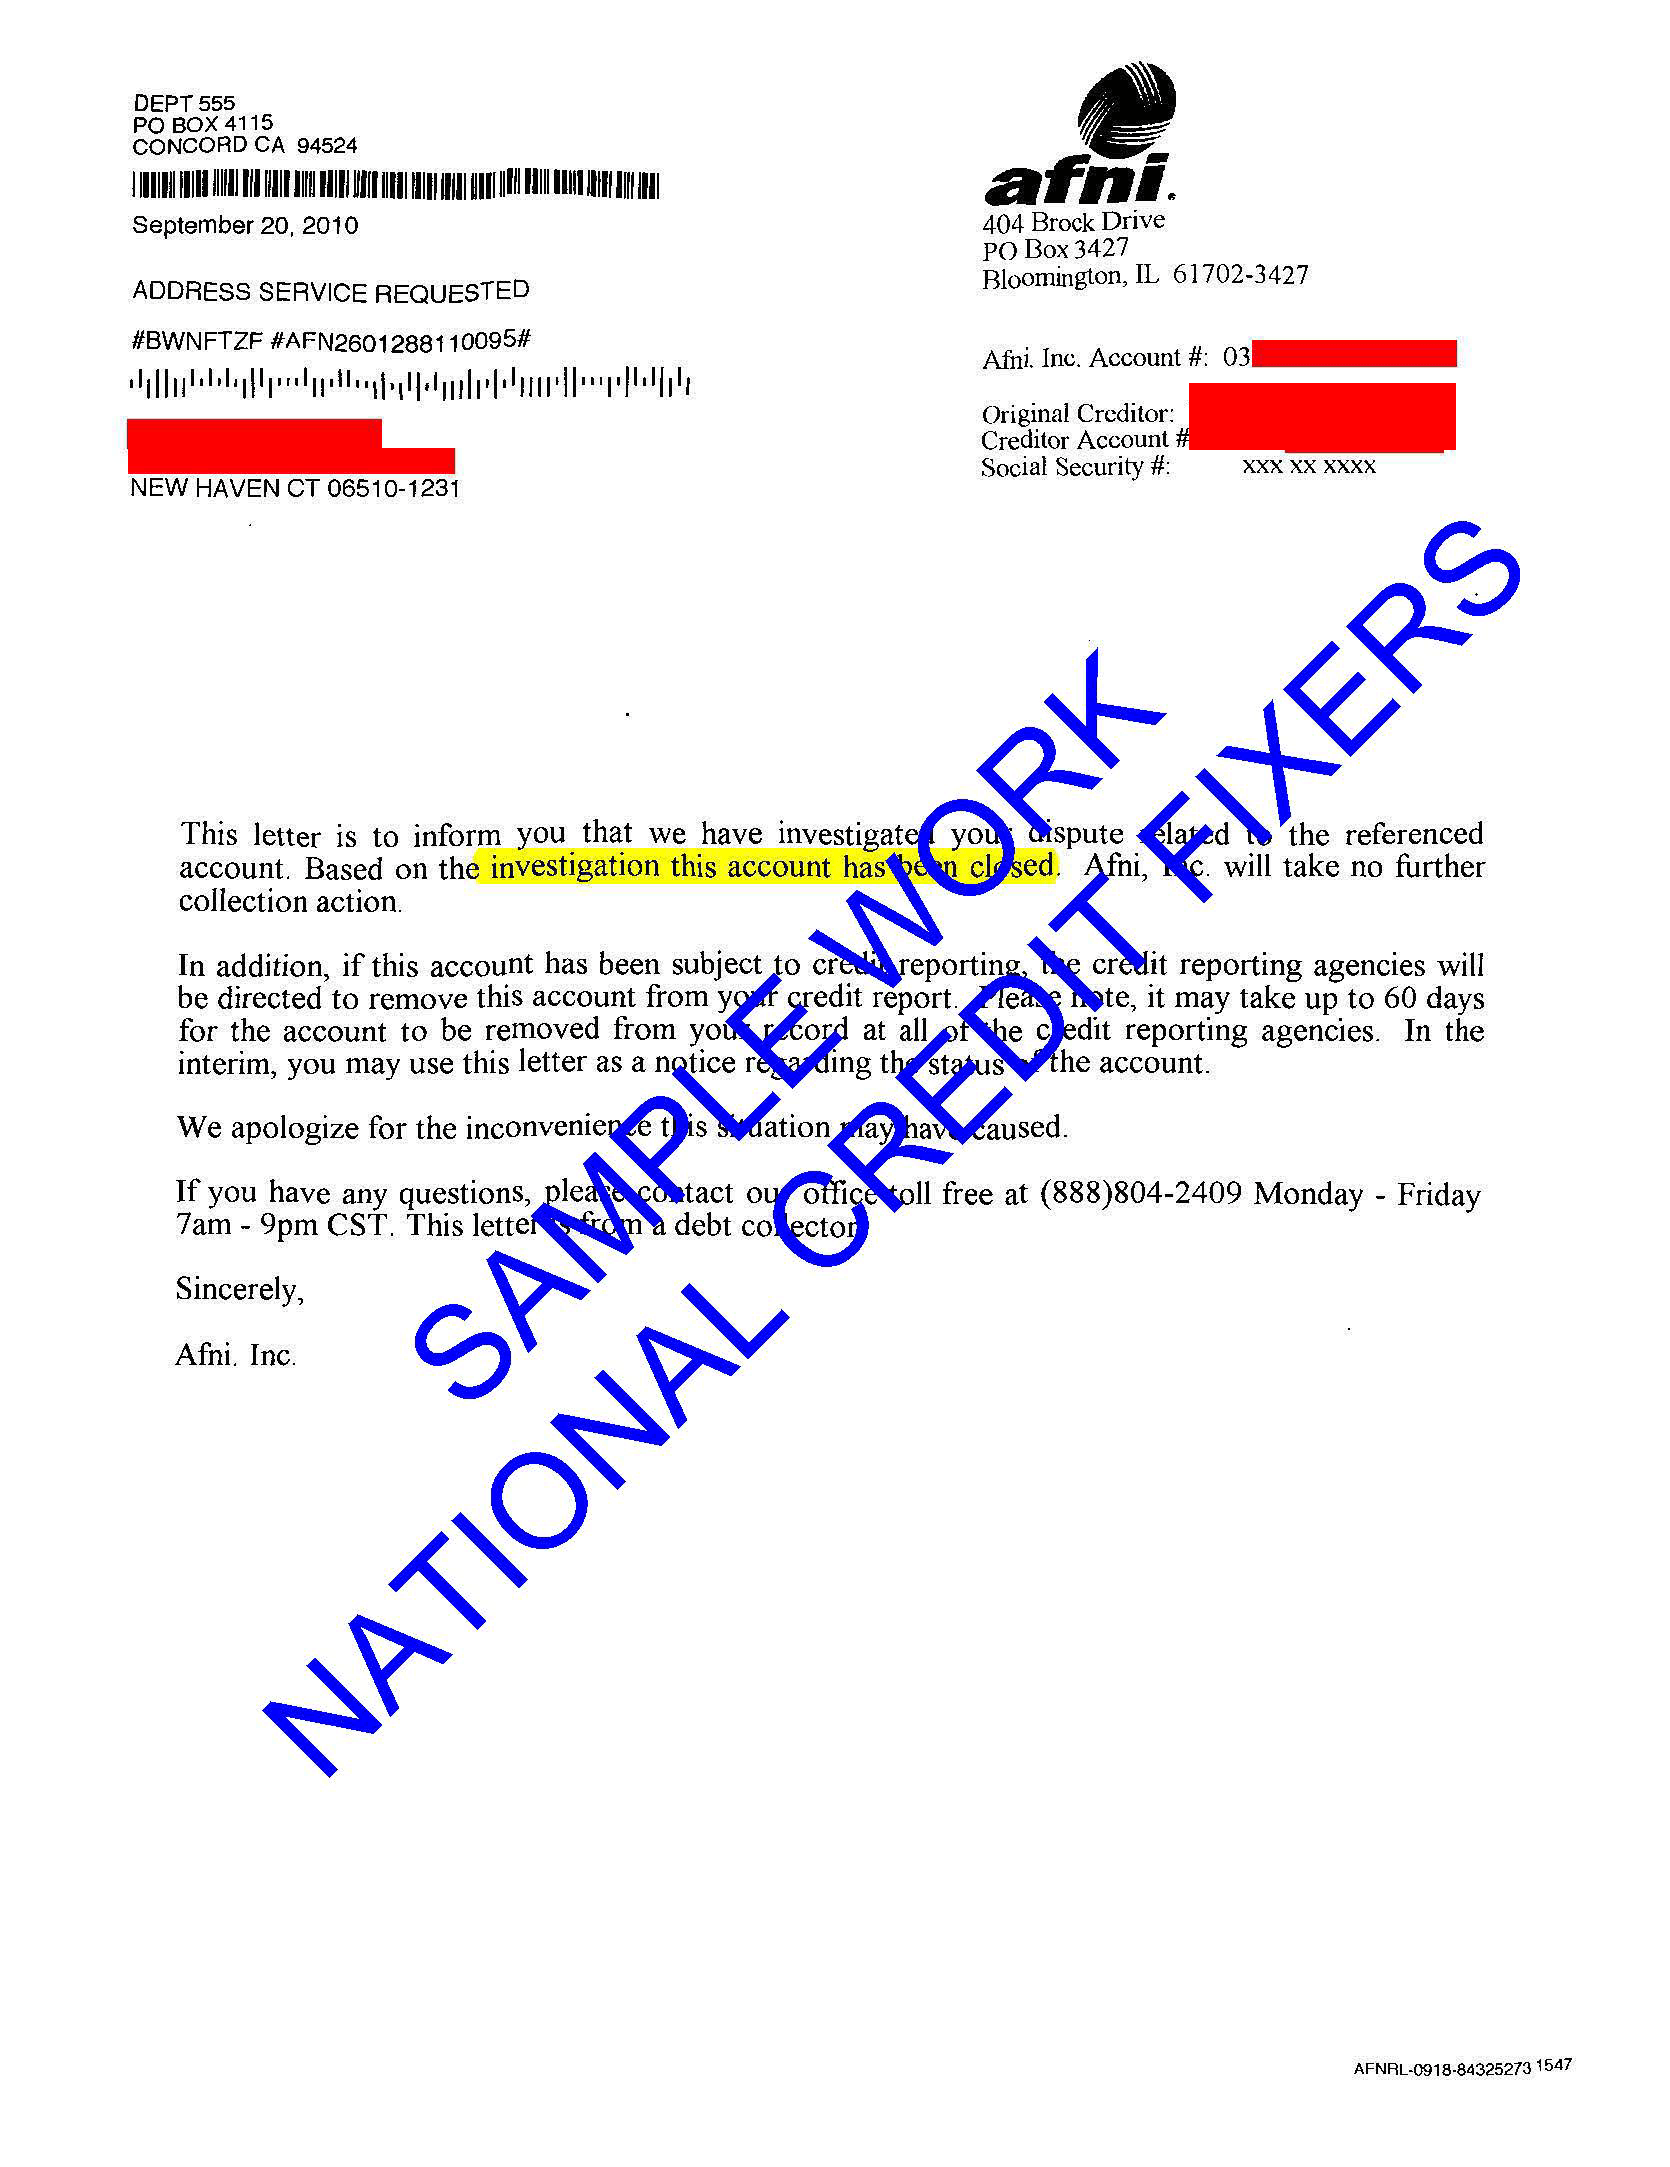 Anderson Financial Network Deletion Letter 3